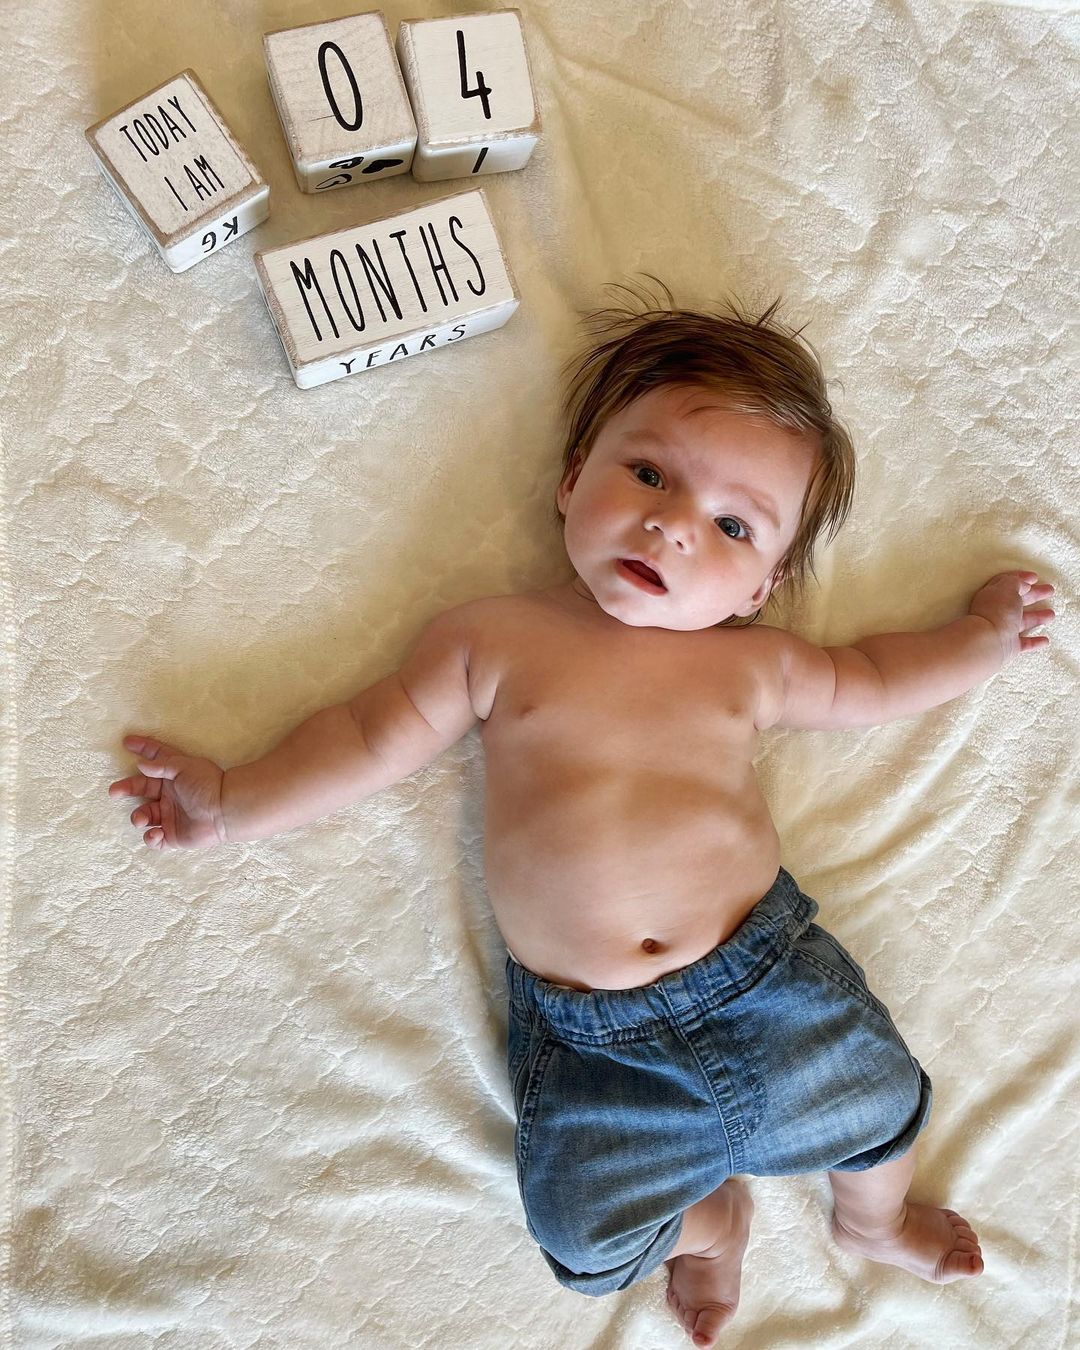 4 Months! Brittany Cartwright and Jax Taylor Share Son Cruz’s Milestones